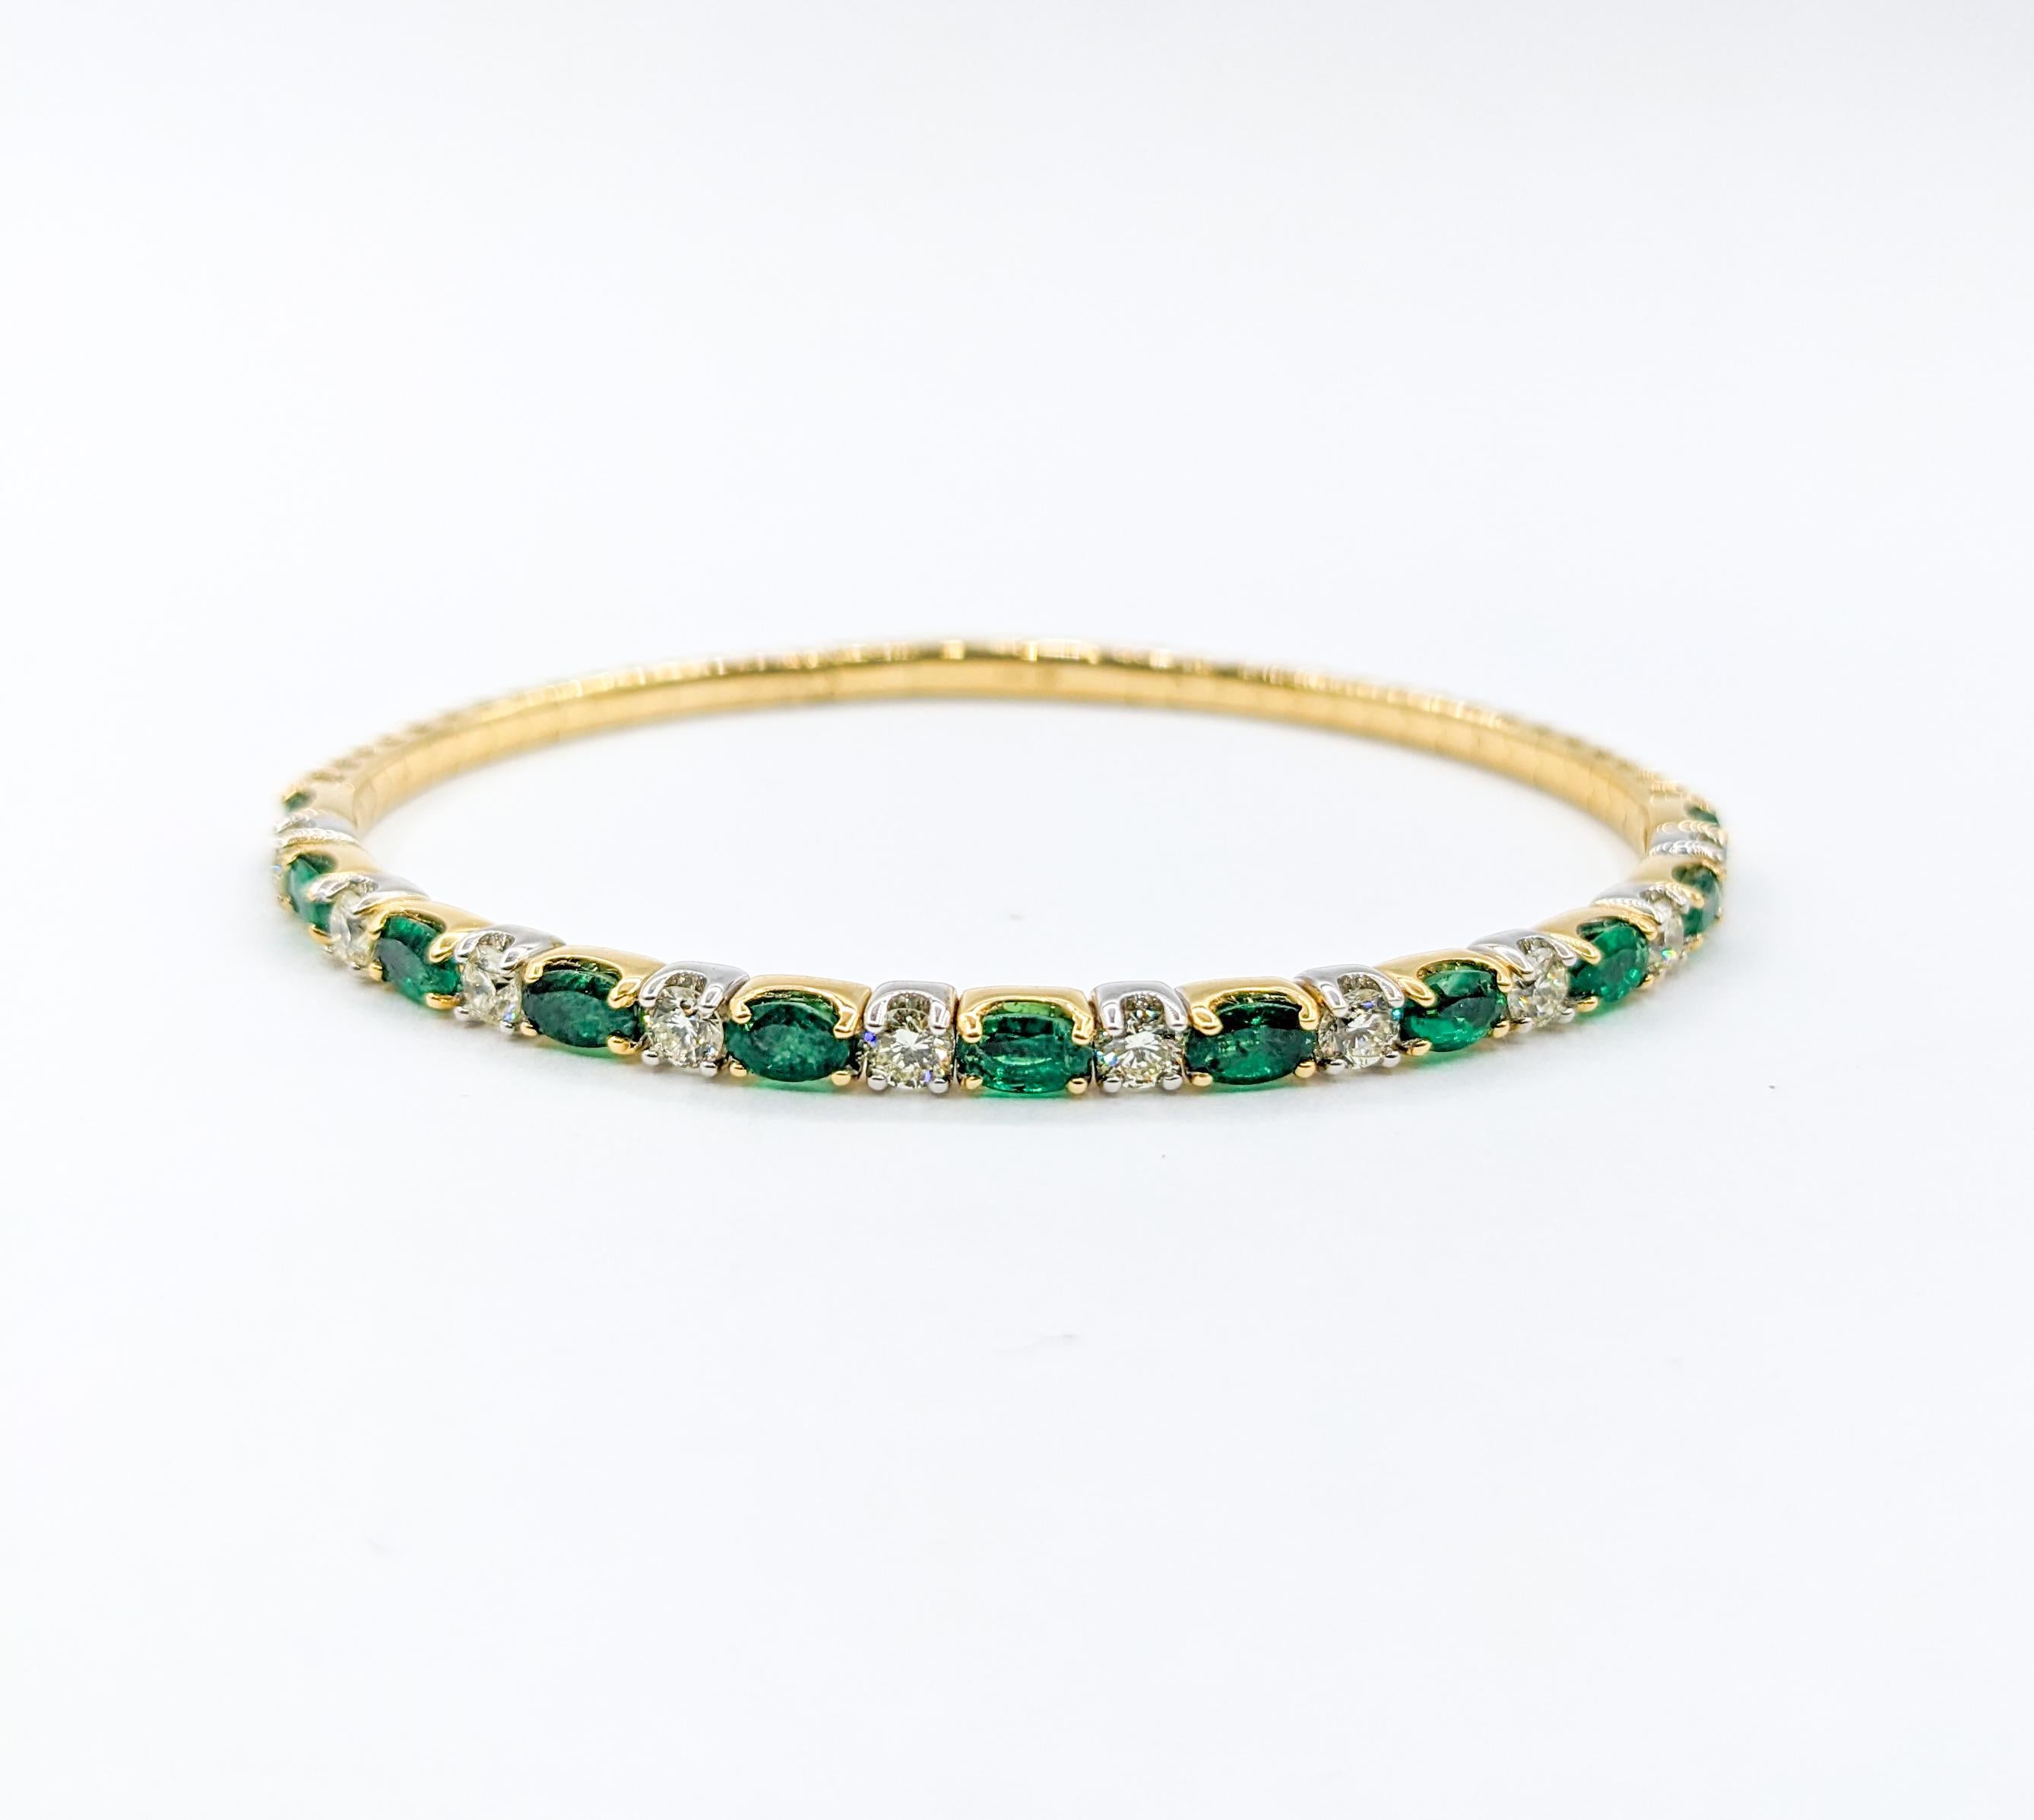 Emerald & Diamond Yellow Gold Bangle Flex Bracelet

Introducing our exquisite 14kt Yellow Gold Bracelet, a true testament to beauty and elegance. This stunning piece features Flex-shaped Diamonds with a total weight of 1.32ctw. The Sparkly Diamonds